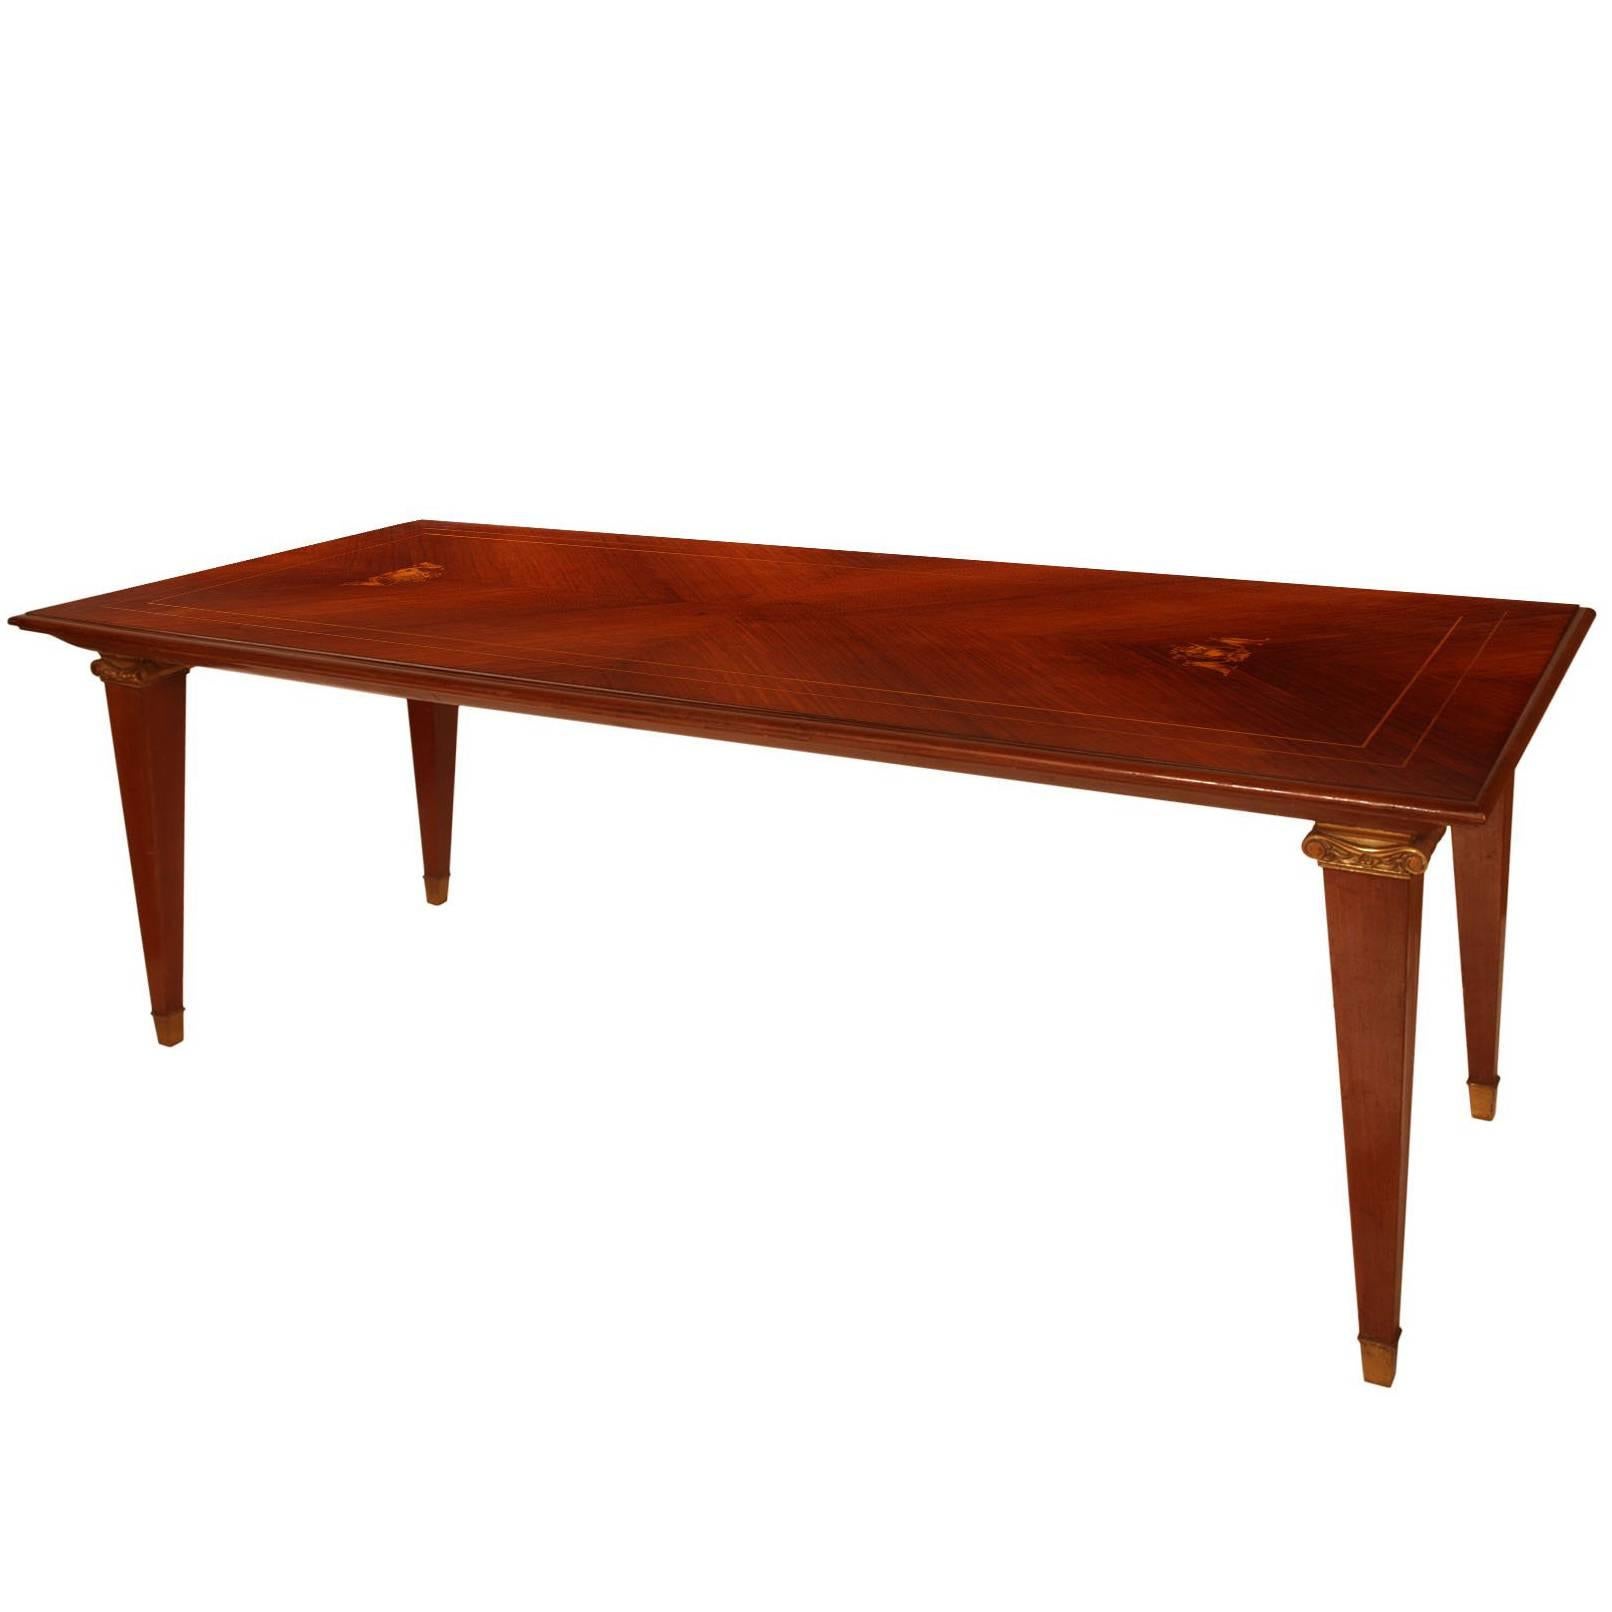 A Cantù production,
important beautiful Italian walnut dinner table strongly attributed to Paolo Buffa in the Empire style of the mid twentieth century ; in walnut and walnut folder with maple wood inlay. Top with walnut folder applied fishbone and